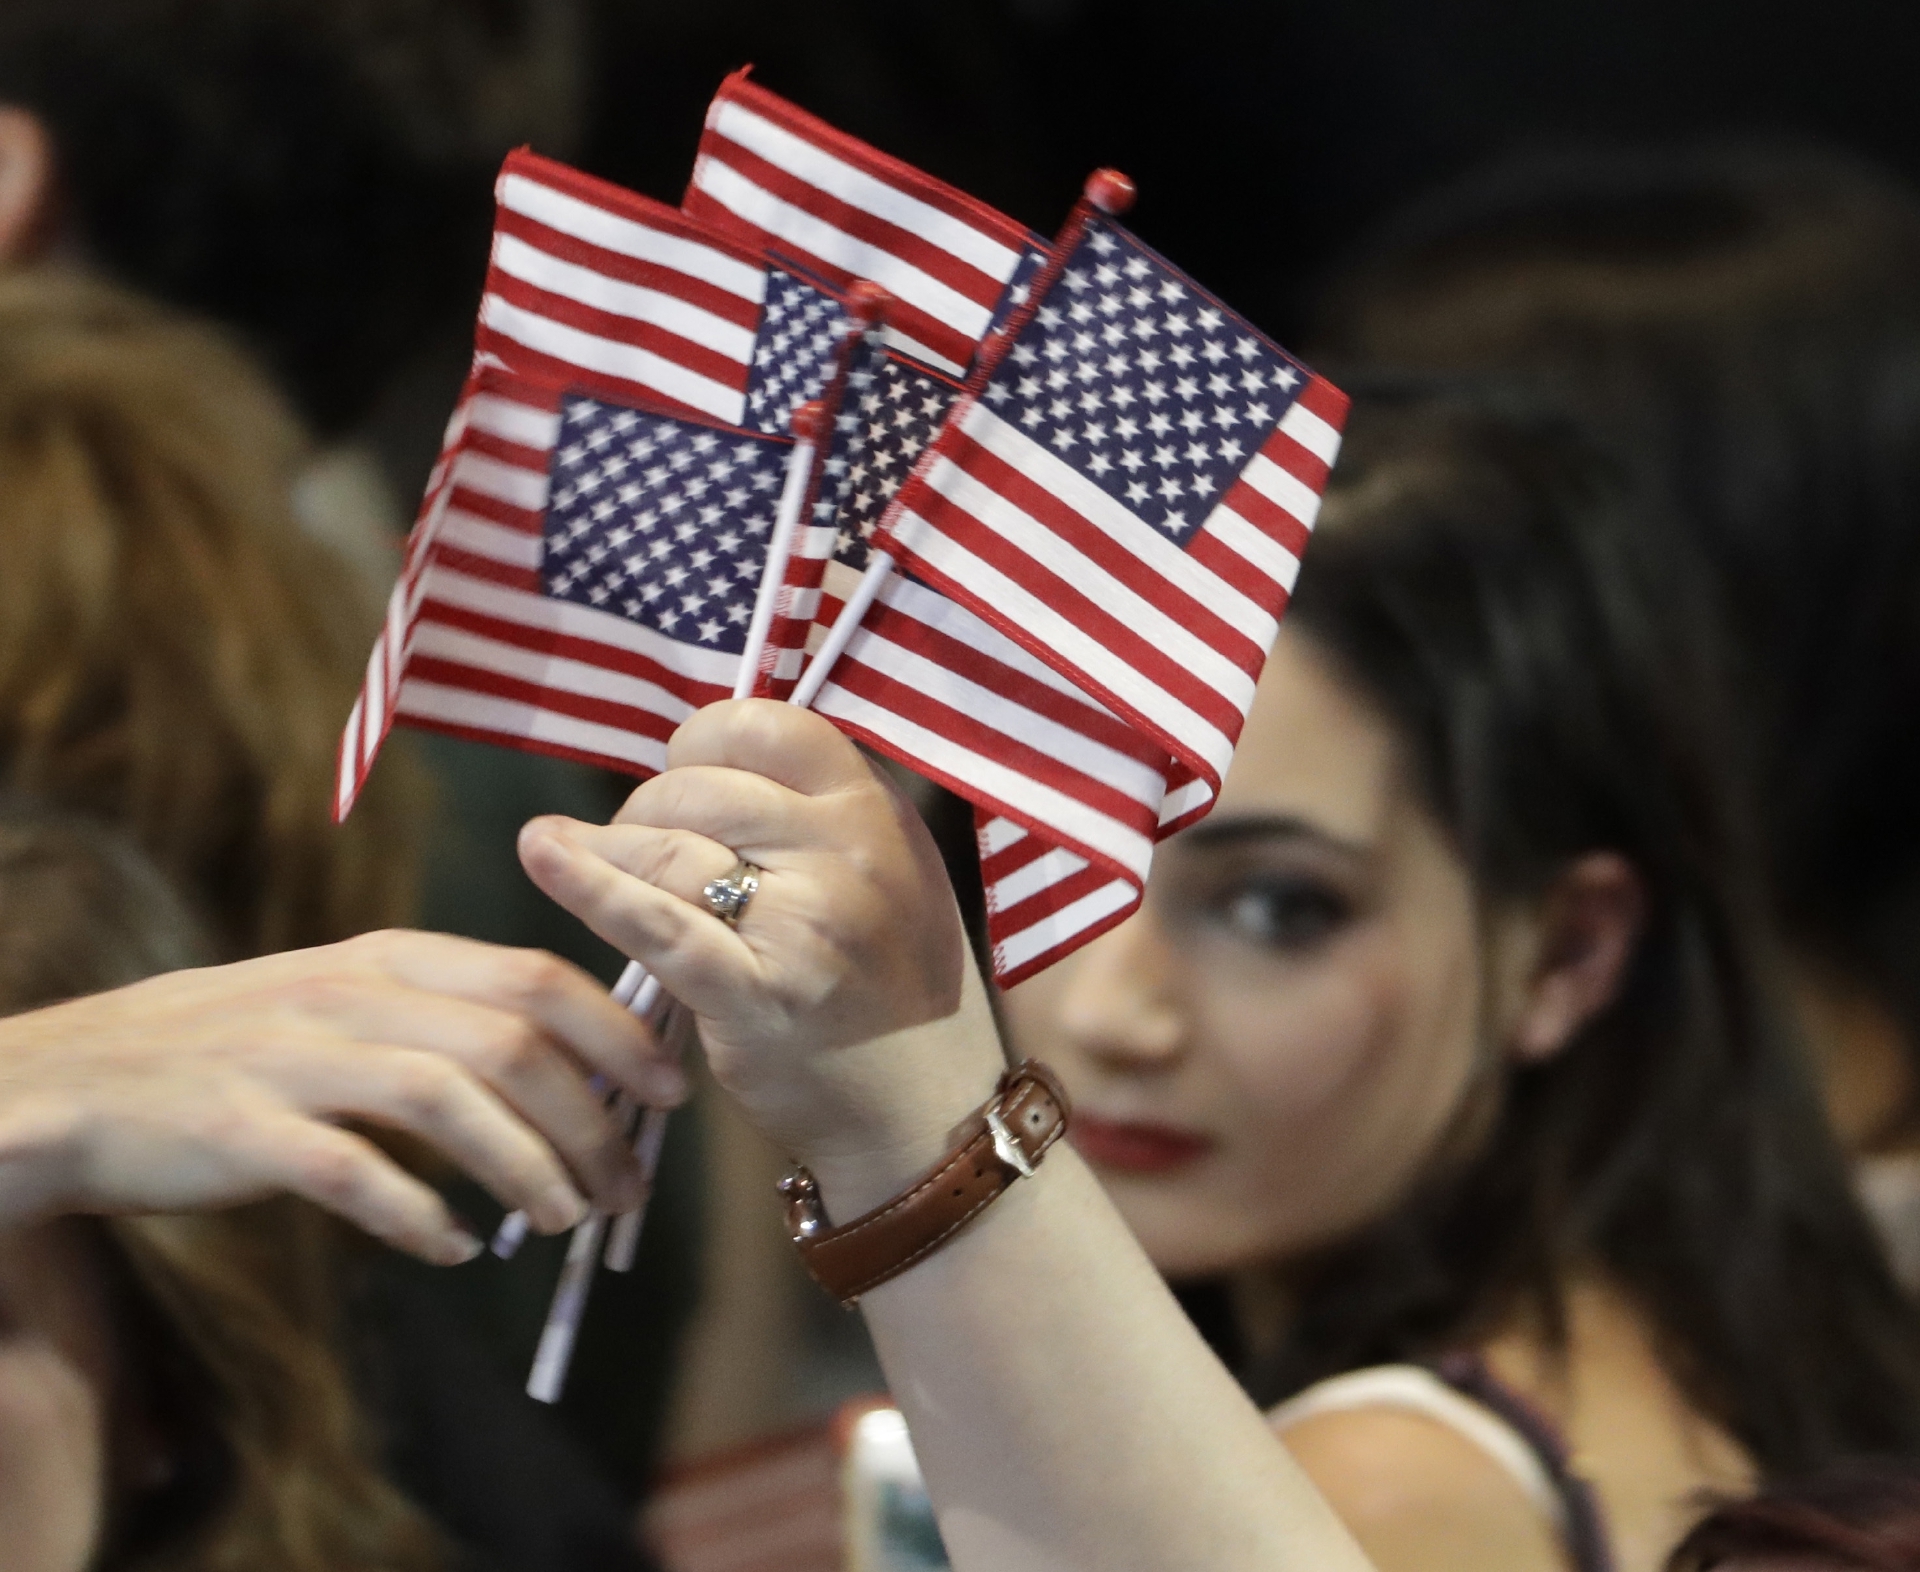 American flags are handed out at a rally.